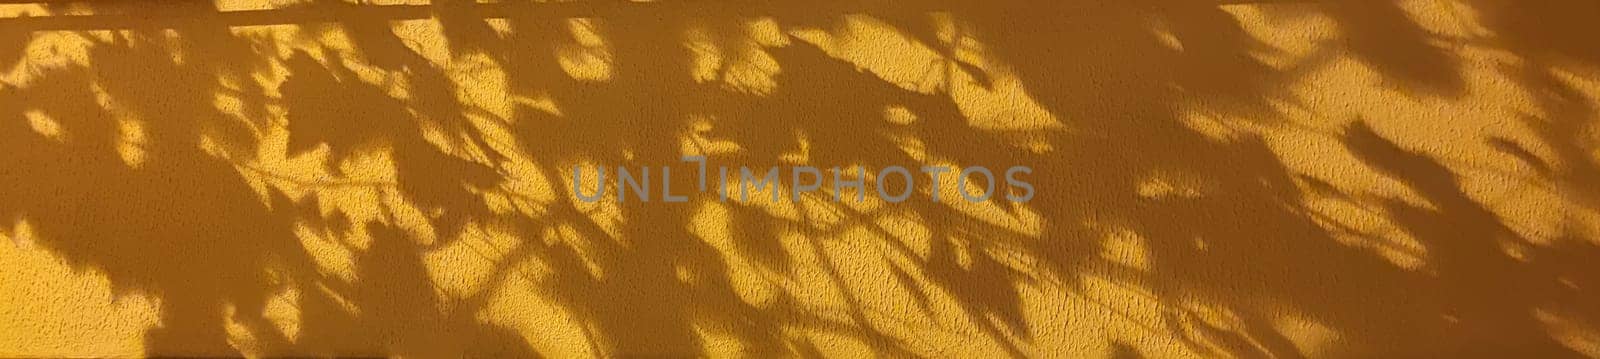 blurred shadow from leaves on yellow plastered wall by Annado